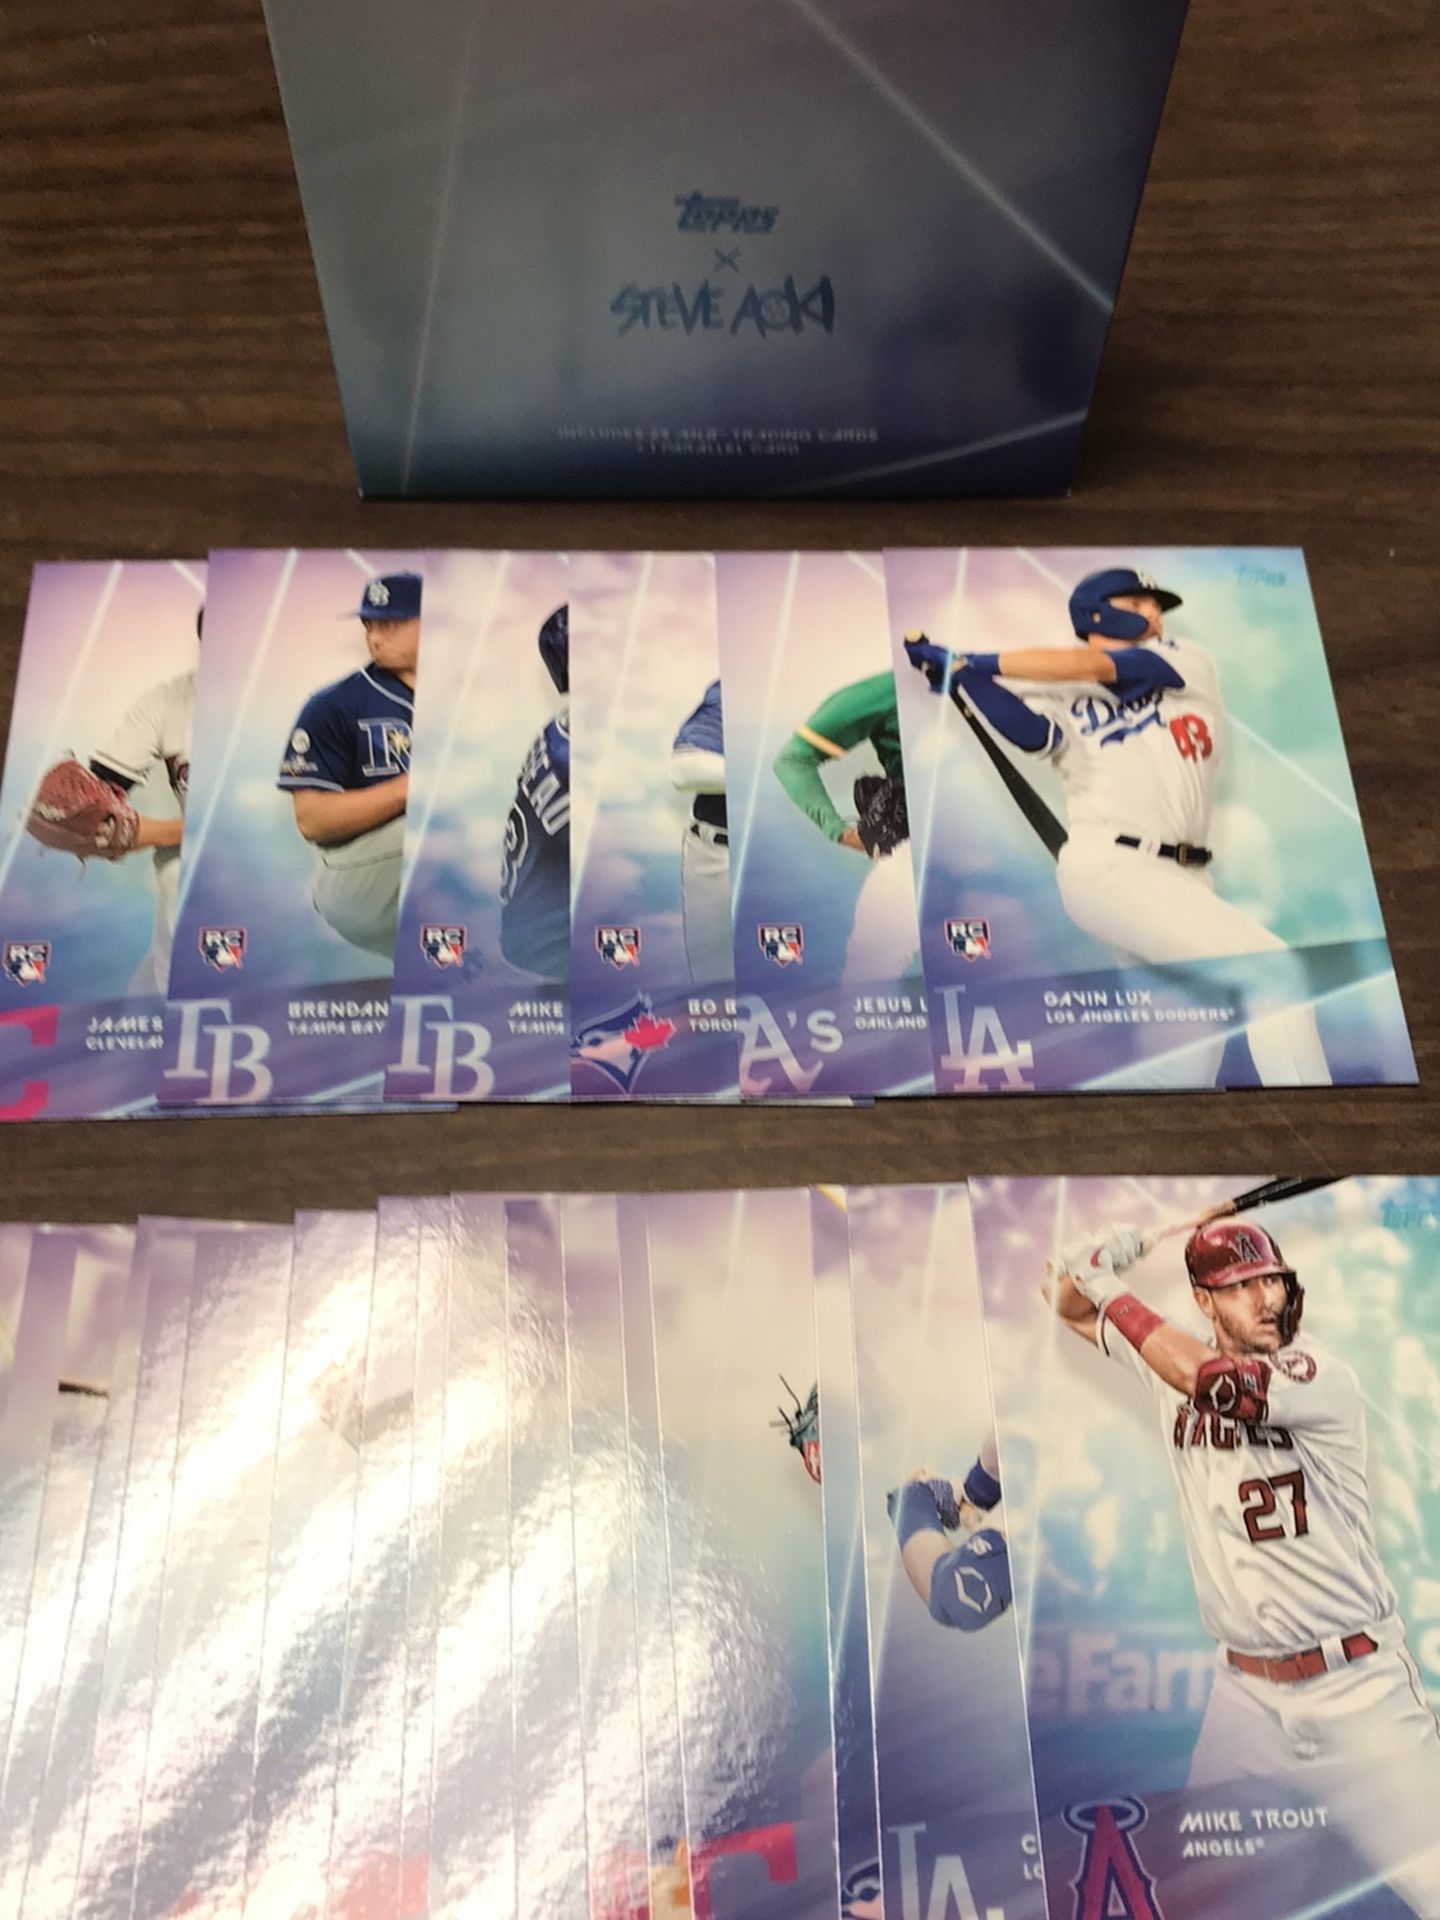 2020 Topps X Steve Aoki Wave 1-4 No Inserts Complete Base Set of (1-100) Card Plus Plastic Card Holder Stars Mike Trout Mookie Betts Juan Soto Ronald